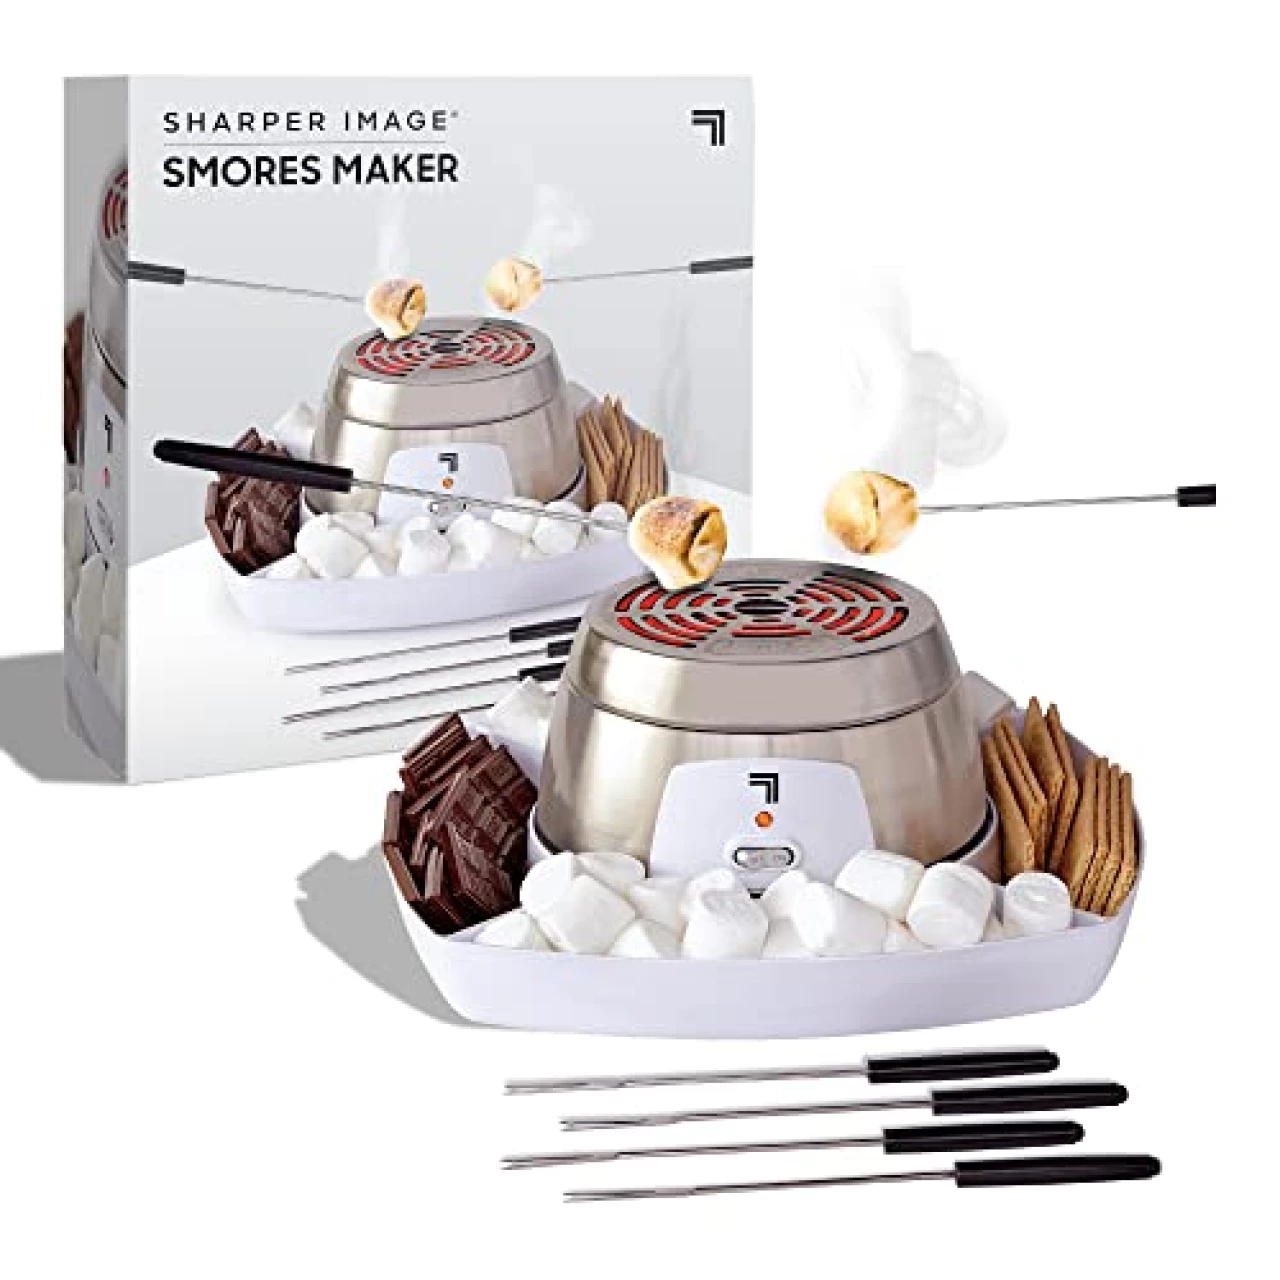 SHARPER IMAGE Electric Tabletop S&rsquo;mores Maker for Indoors, 6-Piece Set, Includes 4 Skewers &amp; 4 Serving Compartments, Easy Cleaning &amp; Storage, Tabletop Marshmallow Roaster, Family Fun For Kids Adults